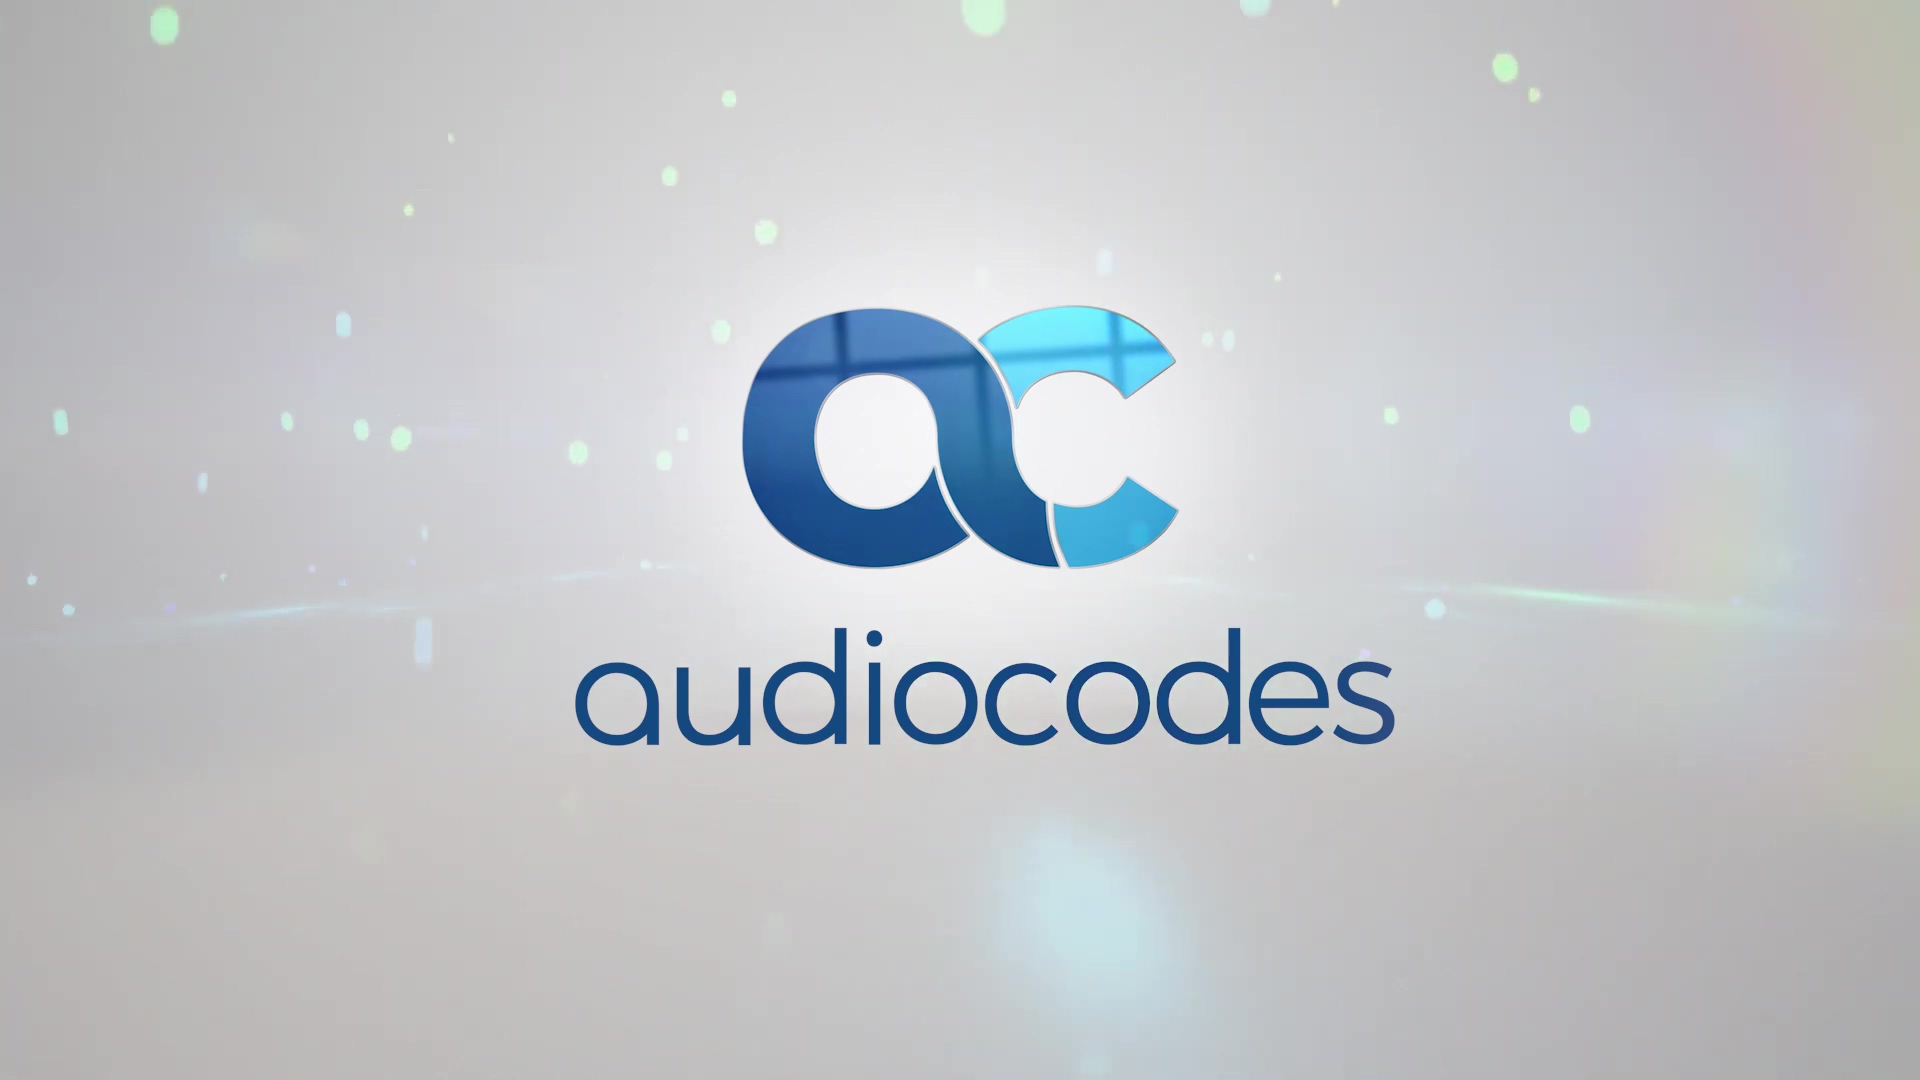 #AudioCodes #VoiceDNA AudioCodes - Voice DNA for The Digital Workplace